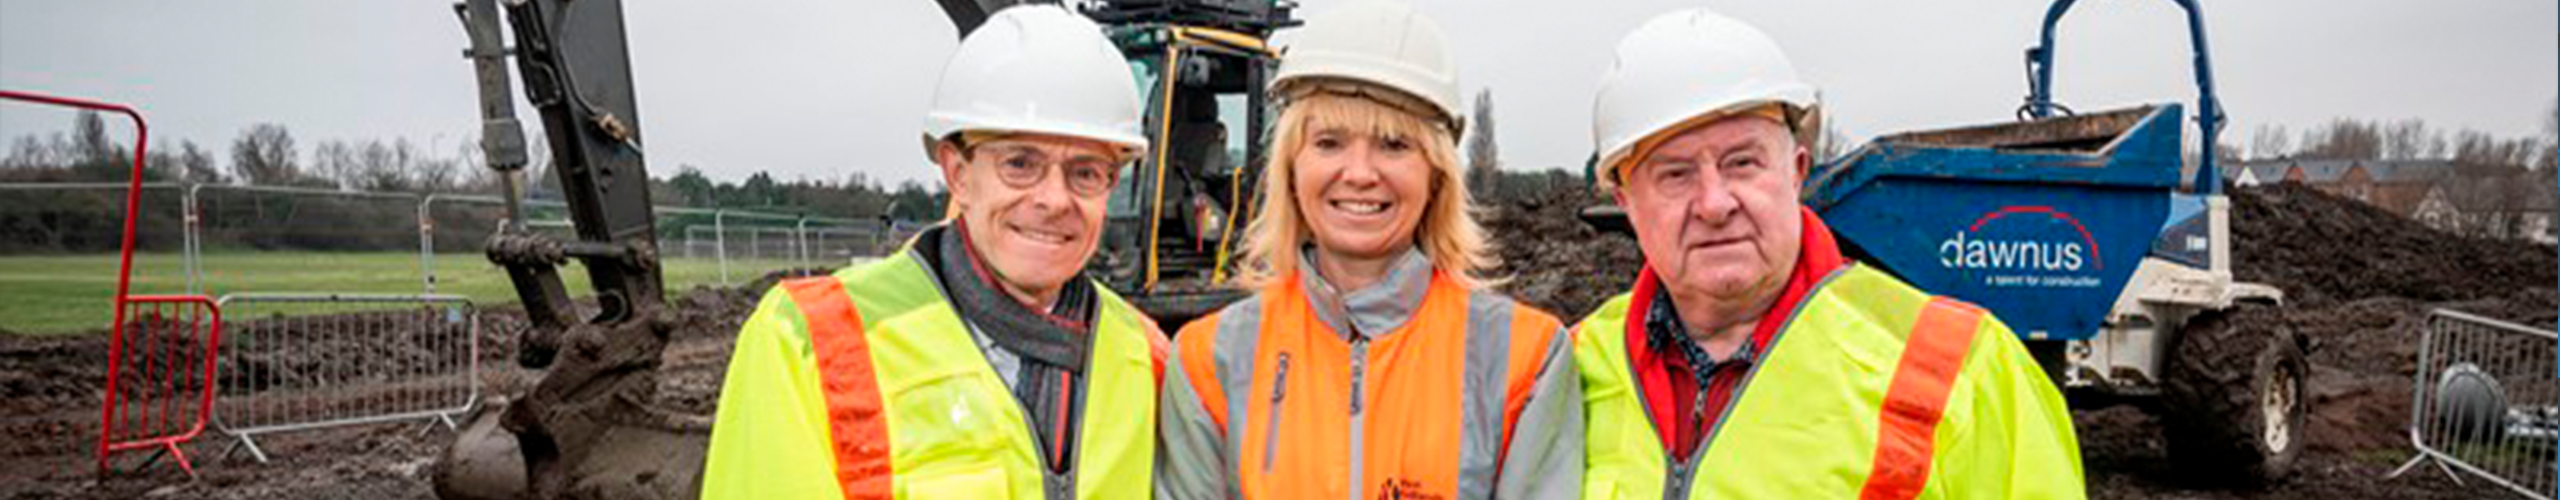 Two men and a woman in high vis and hard hats at construction site